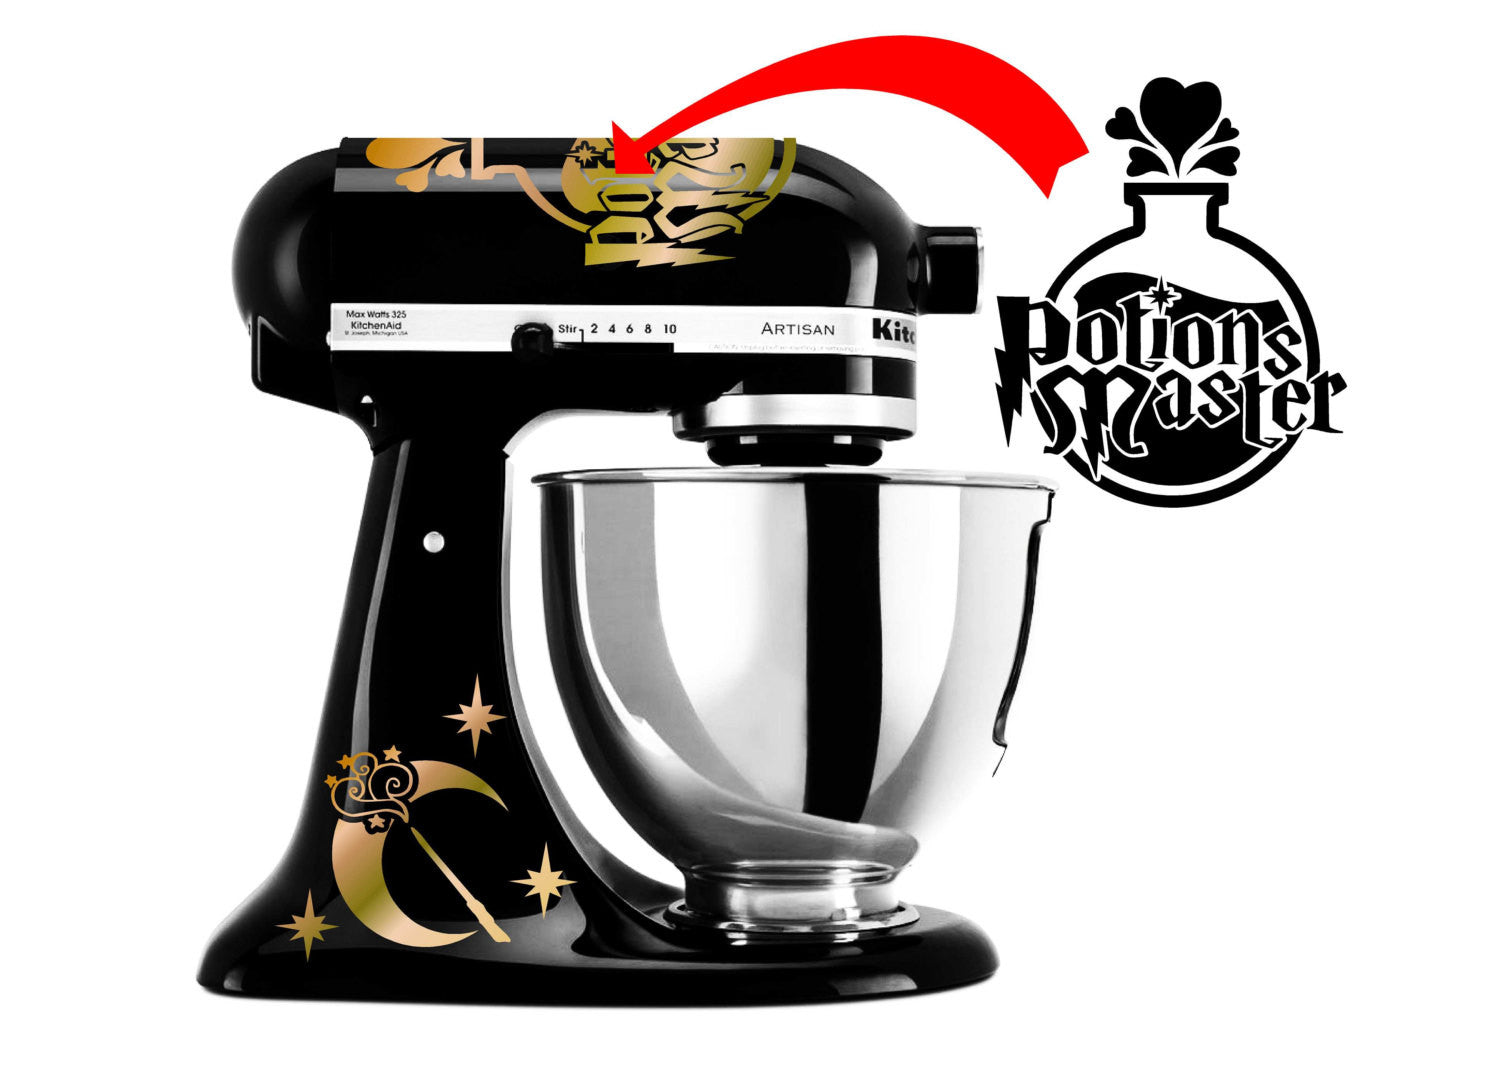 Potions Master Themed Vinyl Decal for Kitchenaid Mixers and More! – AZ  Vinyl Works